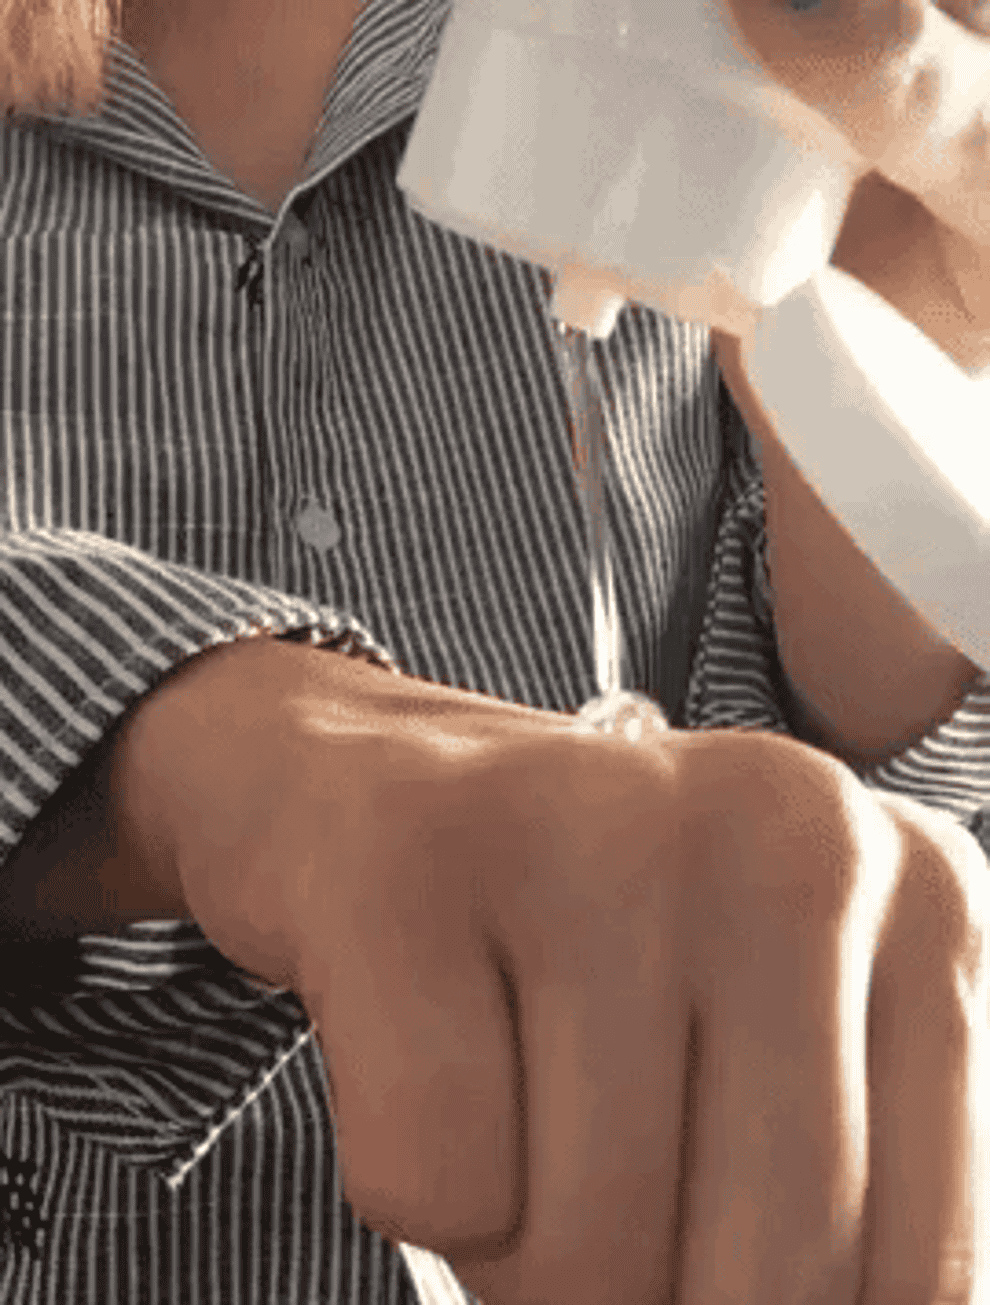 A person wearing a striped shirt squeezes a transparent gel onto the back of their right hand.